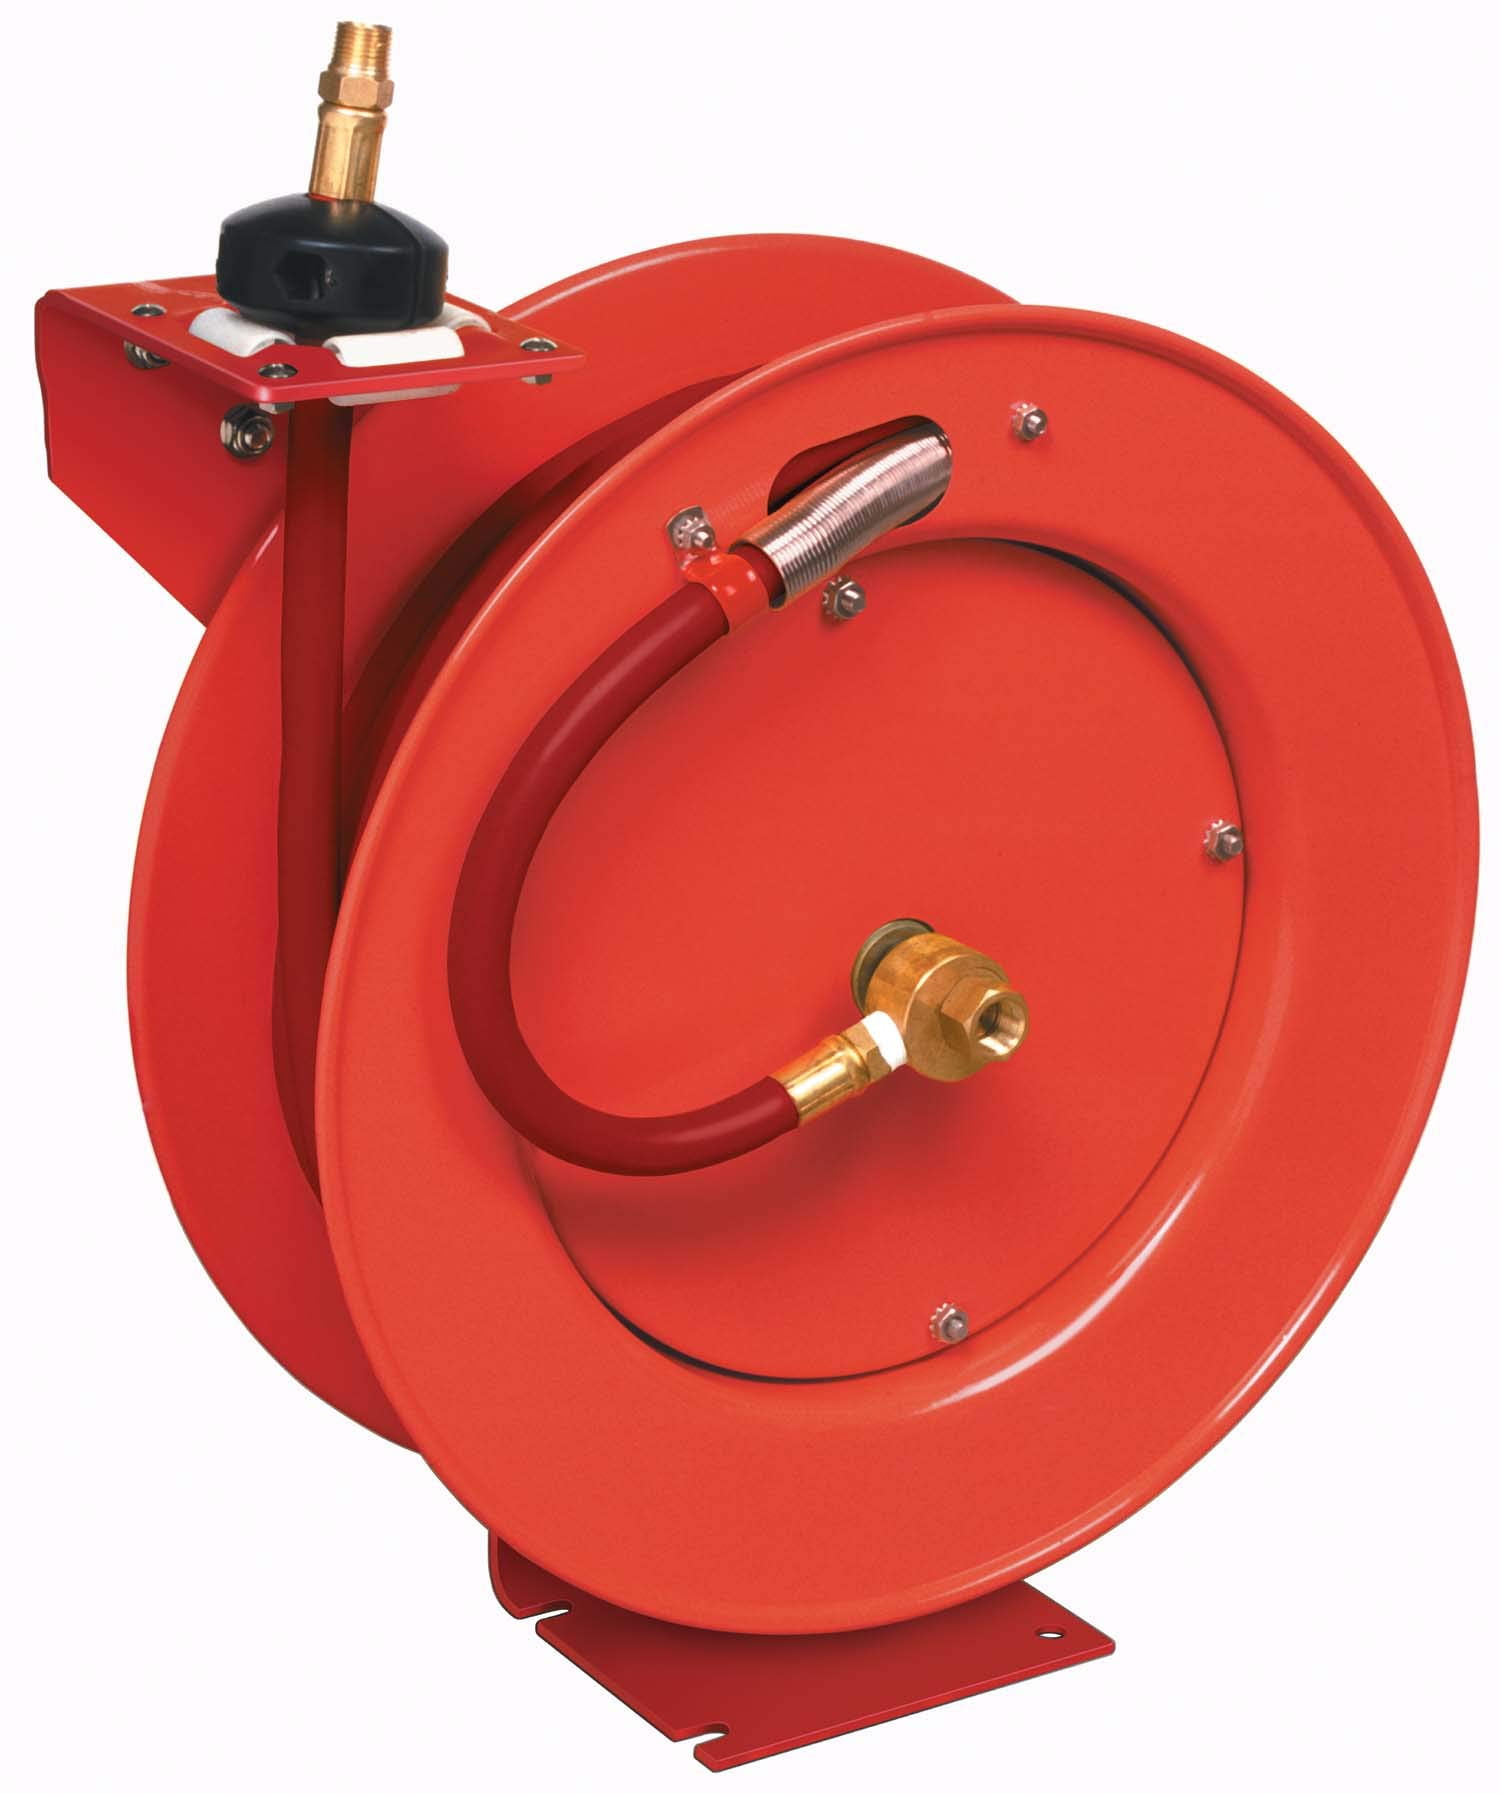 ReelWorks Air Hose Reel Retractable 3/8 Inch X 50' Foot PVC Hose Max 300PSI Commercial Polypropylene Construction